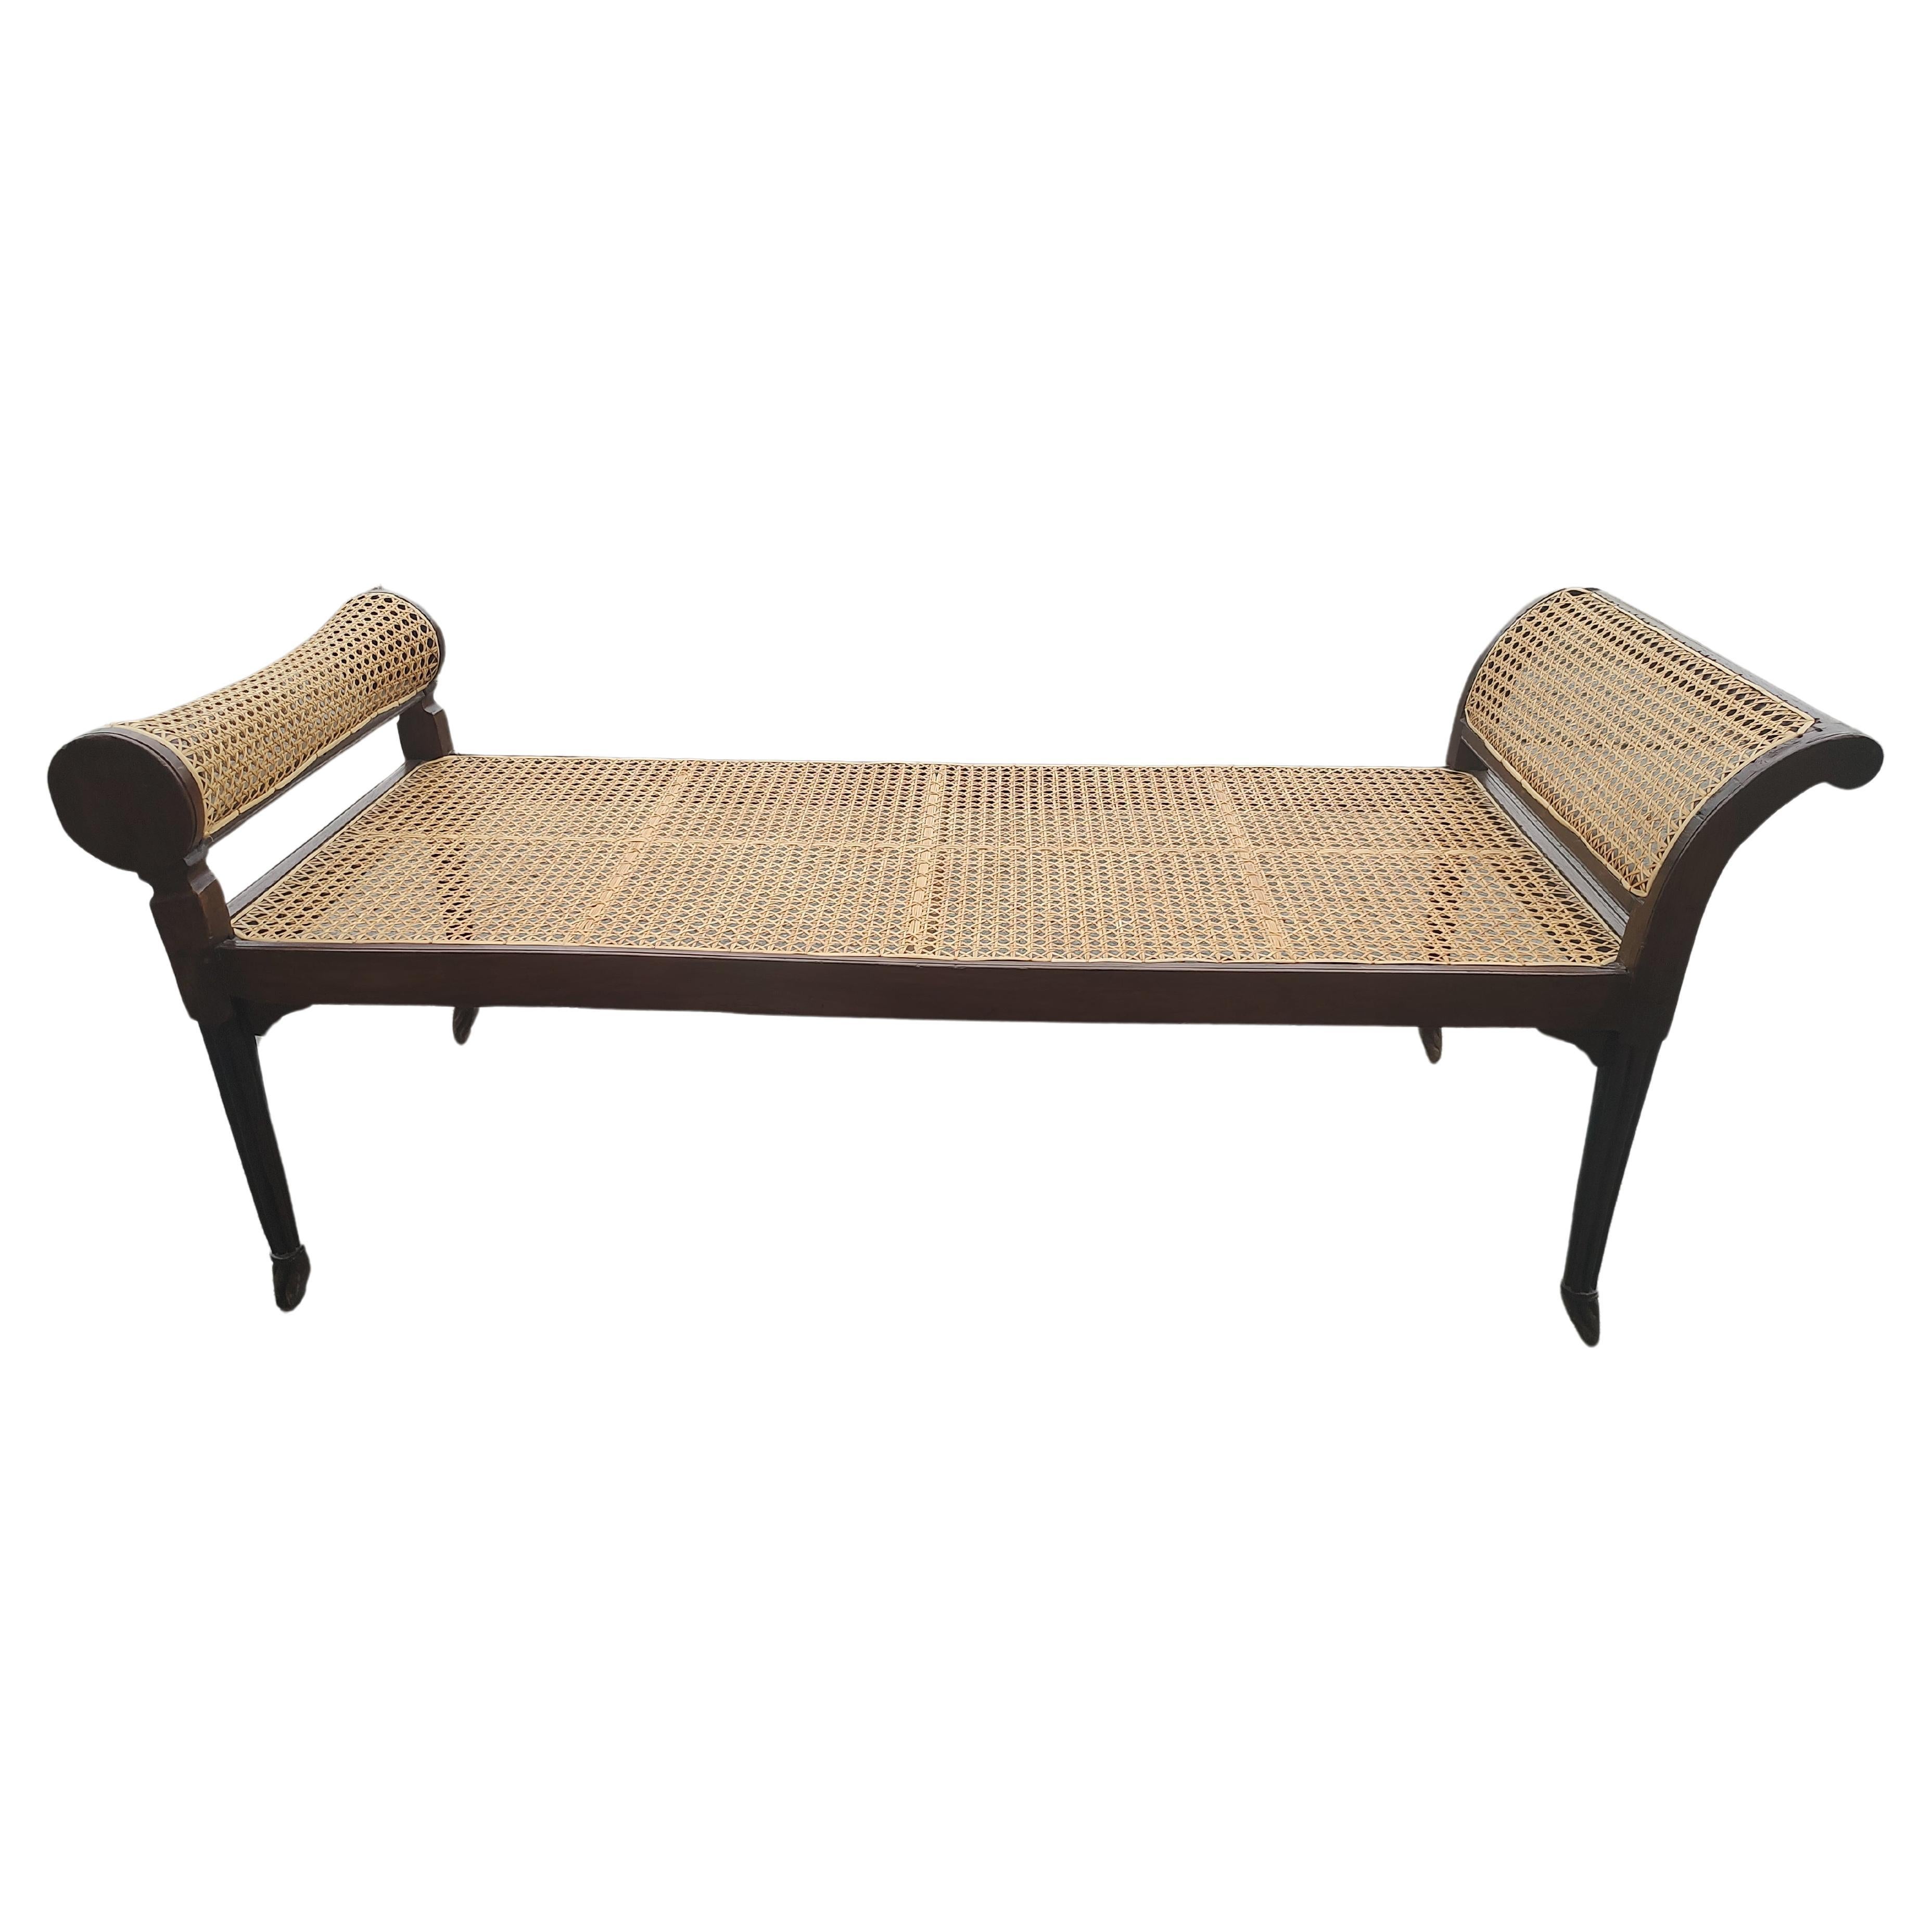 19thC English Regency Caned Recamier Style Window Seat with Reeded legs Mahogany For Sale 3